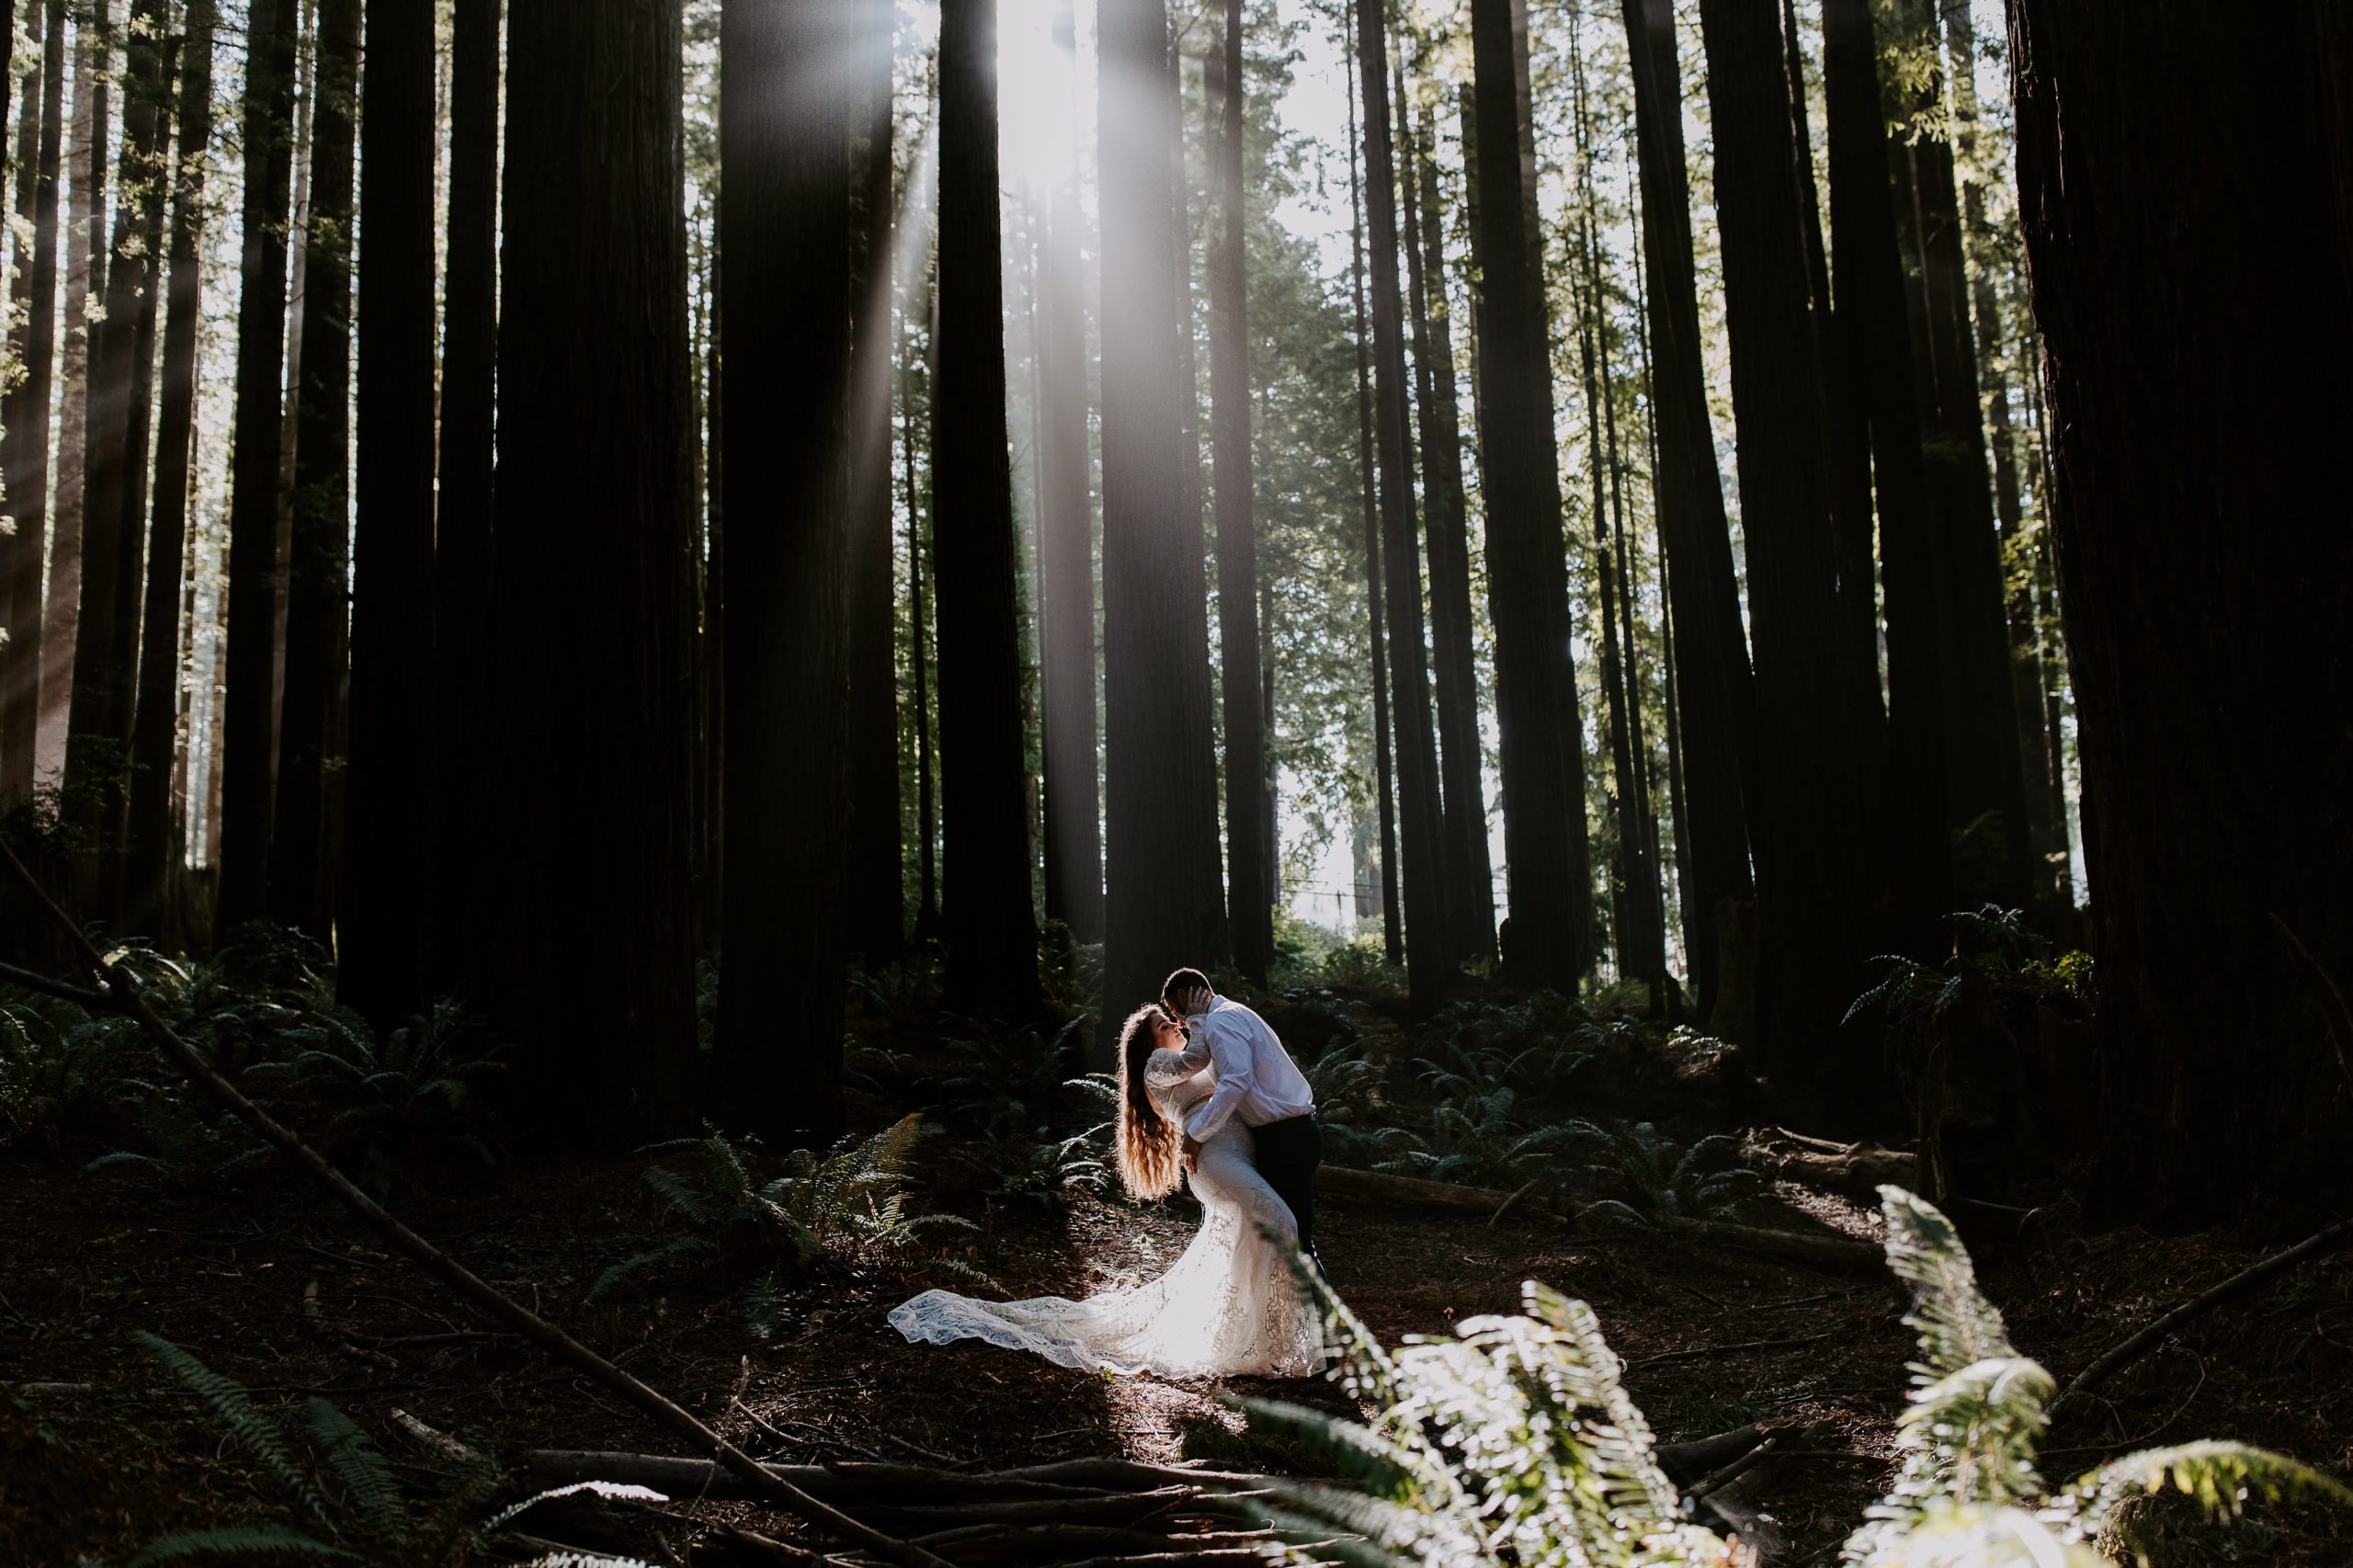 Groom dipping his partner for a kiss as the sun filters through the redwoods during their Northern California elopement in the Redwoods